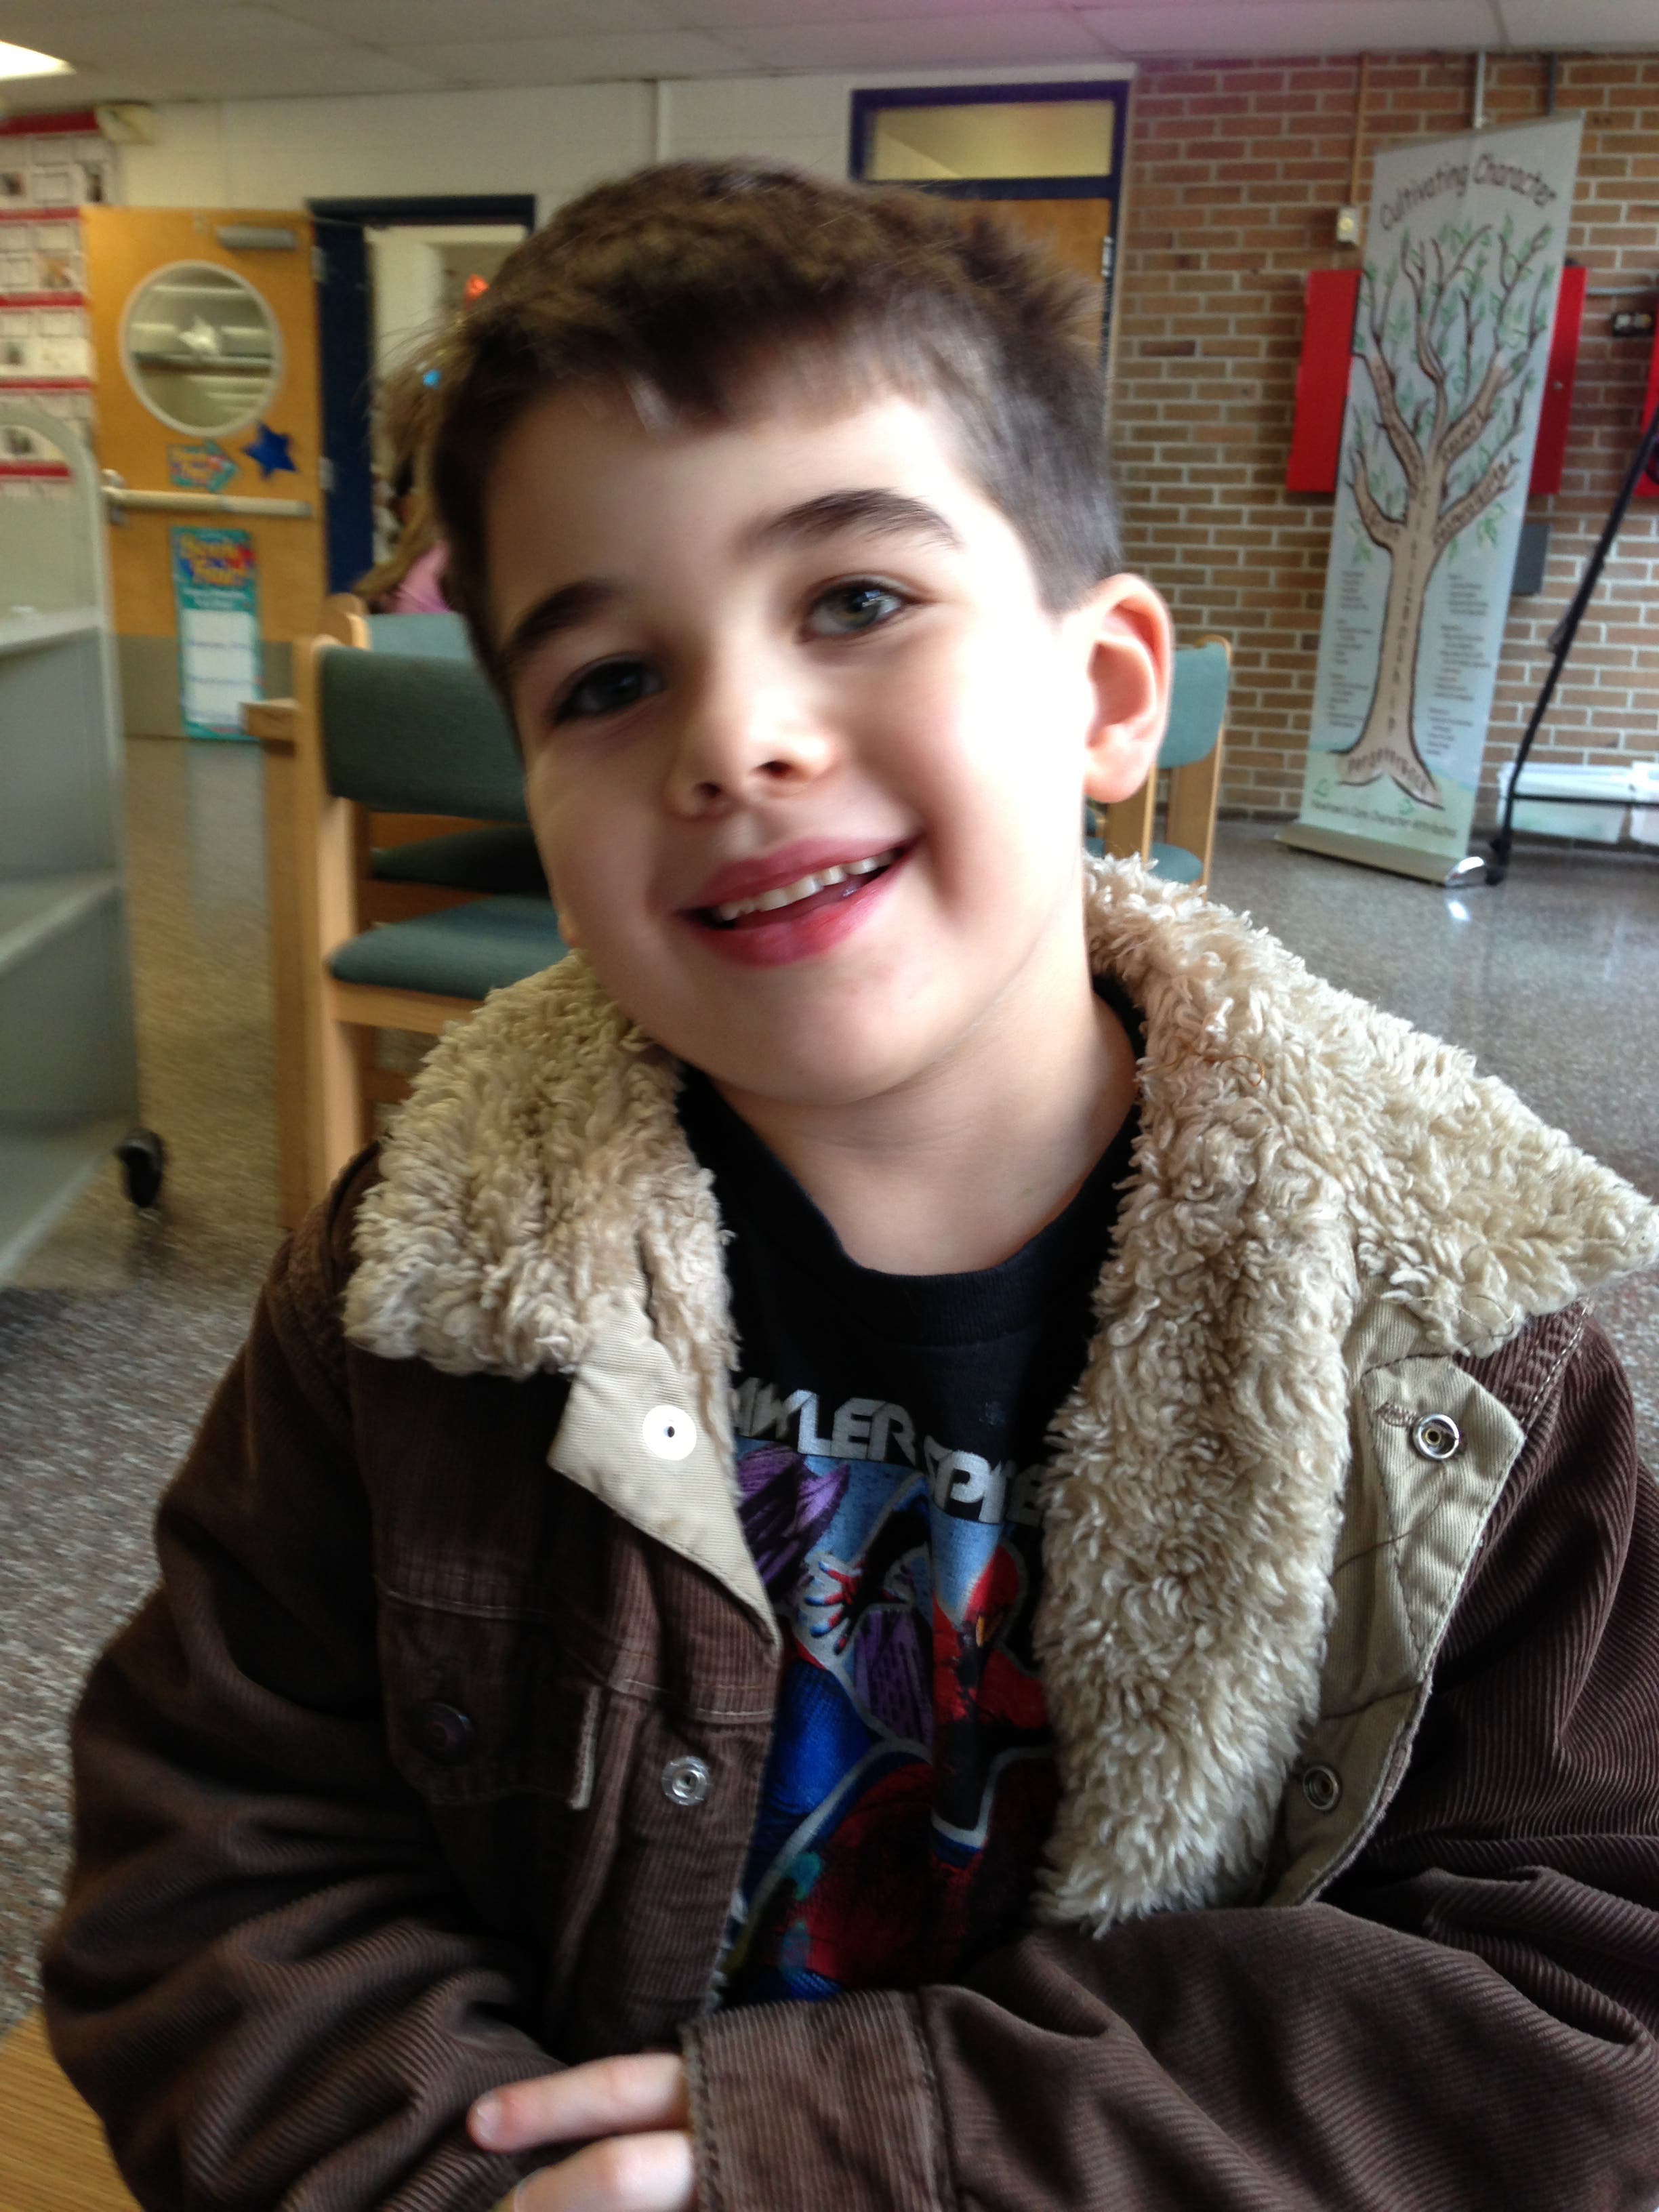 This file photo provided by the family via The Washington Post shows Noah Pozner, 6, killed in the Sandy Hook elementary school shooting in Newtown, Conn.  (File photo: AP Photo/Family Photo)